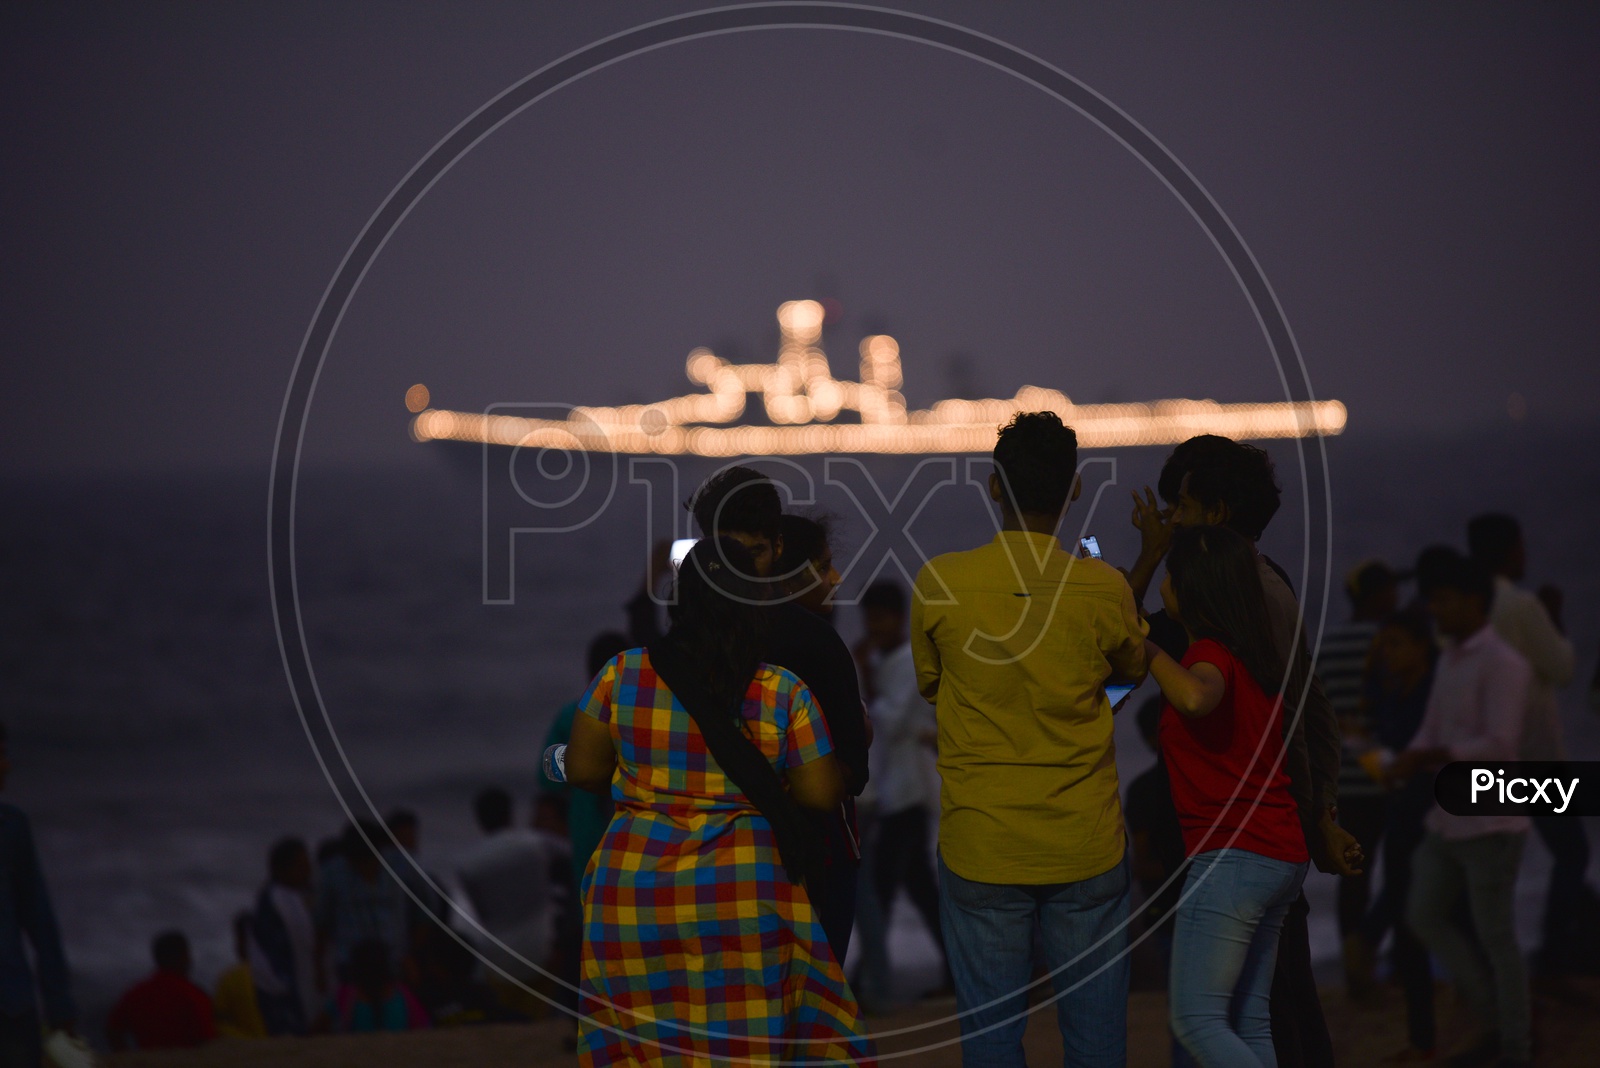 People watch a decorated Navy Ship on Navy Day,December 2019 in Visakhapatnam